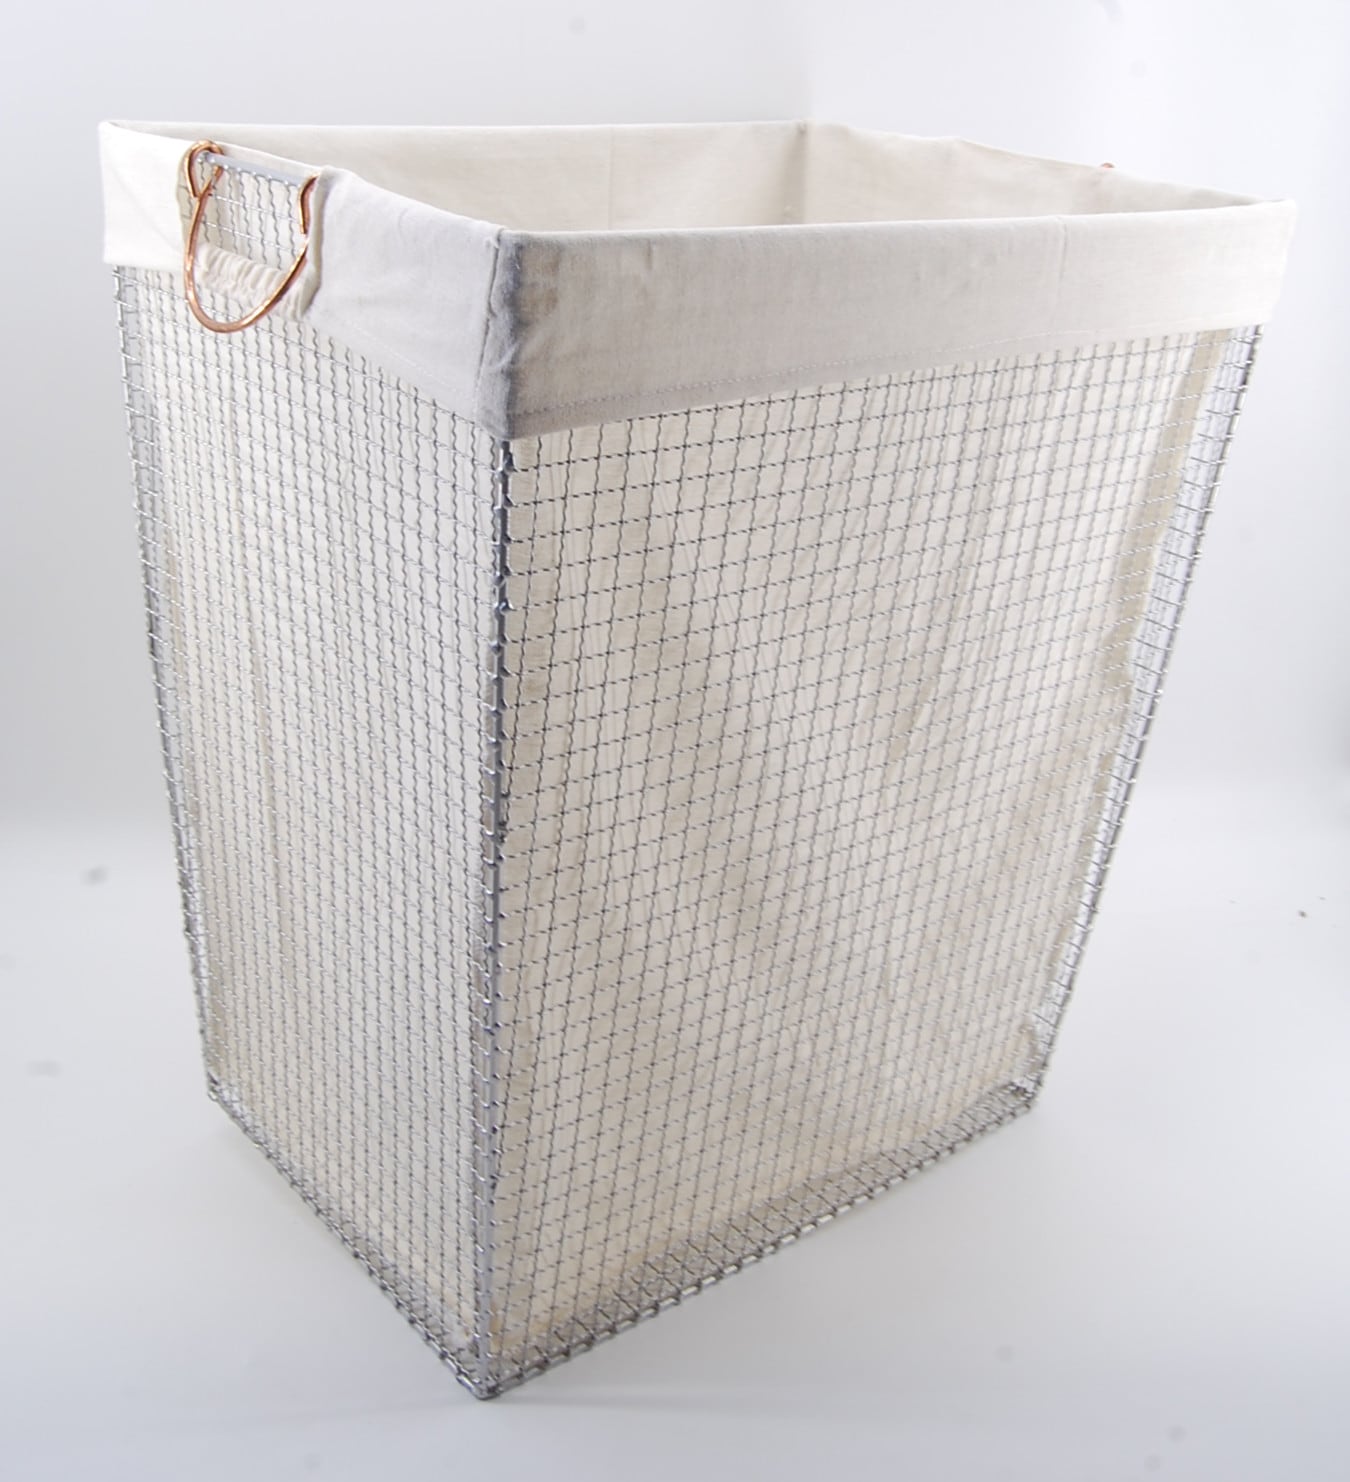 Buy CRODOR Cotton Laundry Bag | Dirty Clothes Organizer | Clothes Storage  Travel Essentials| Laundry Liner College Essentials Laundry Hamper or Basket  | Portable | Machine Washable (Pack of 1, Off White)